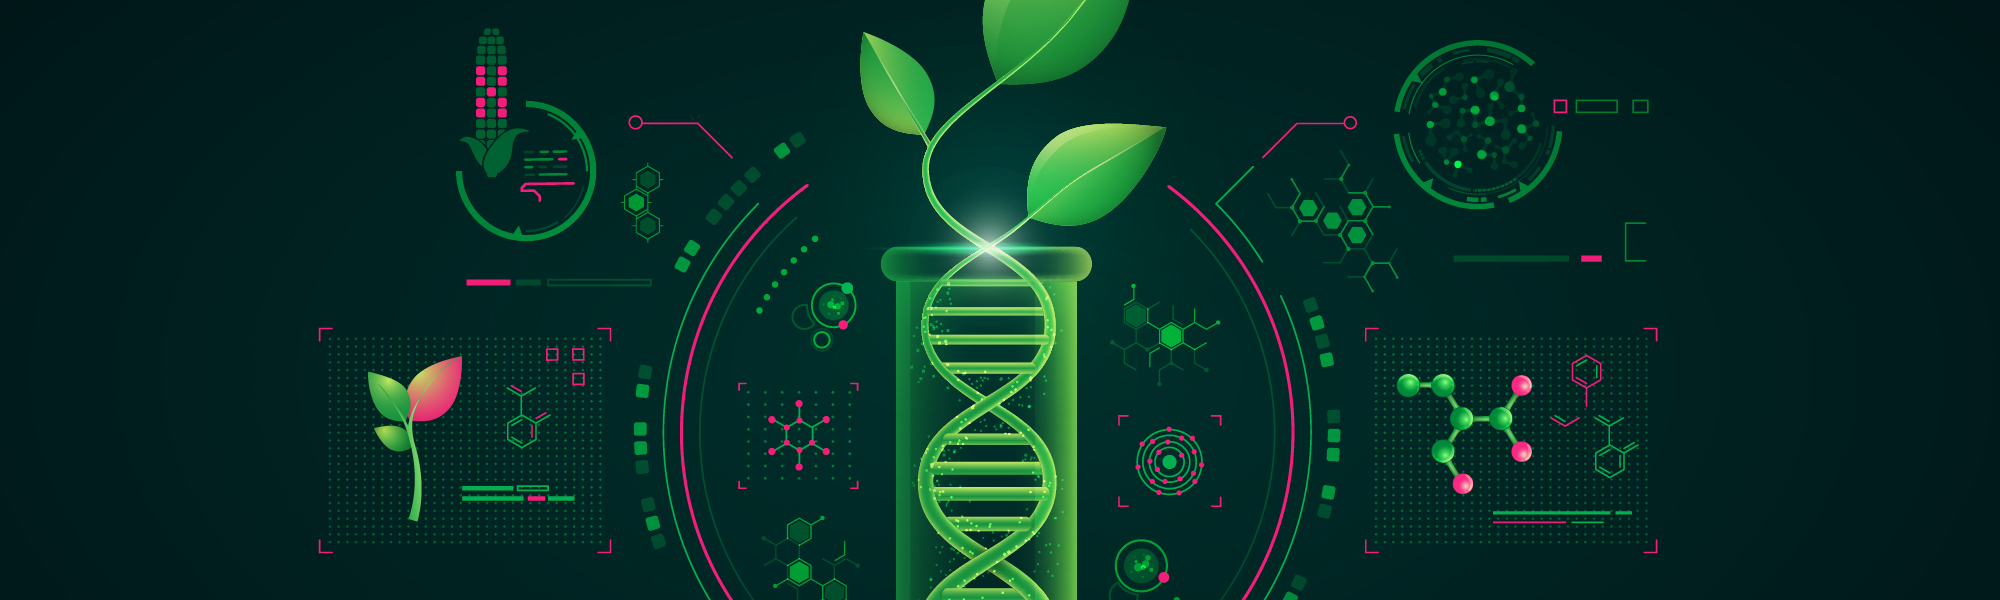 Concept of green biotechnology or synthetic biology, graphic of plant combined with DNA shape